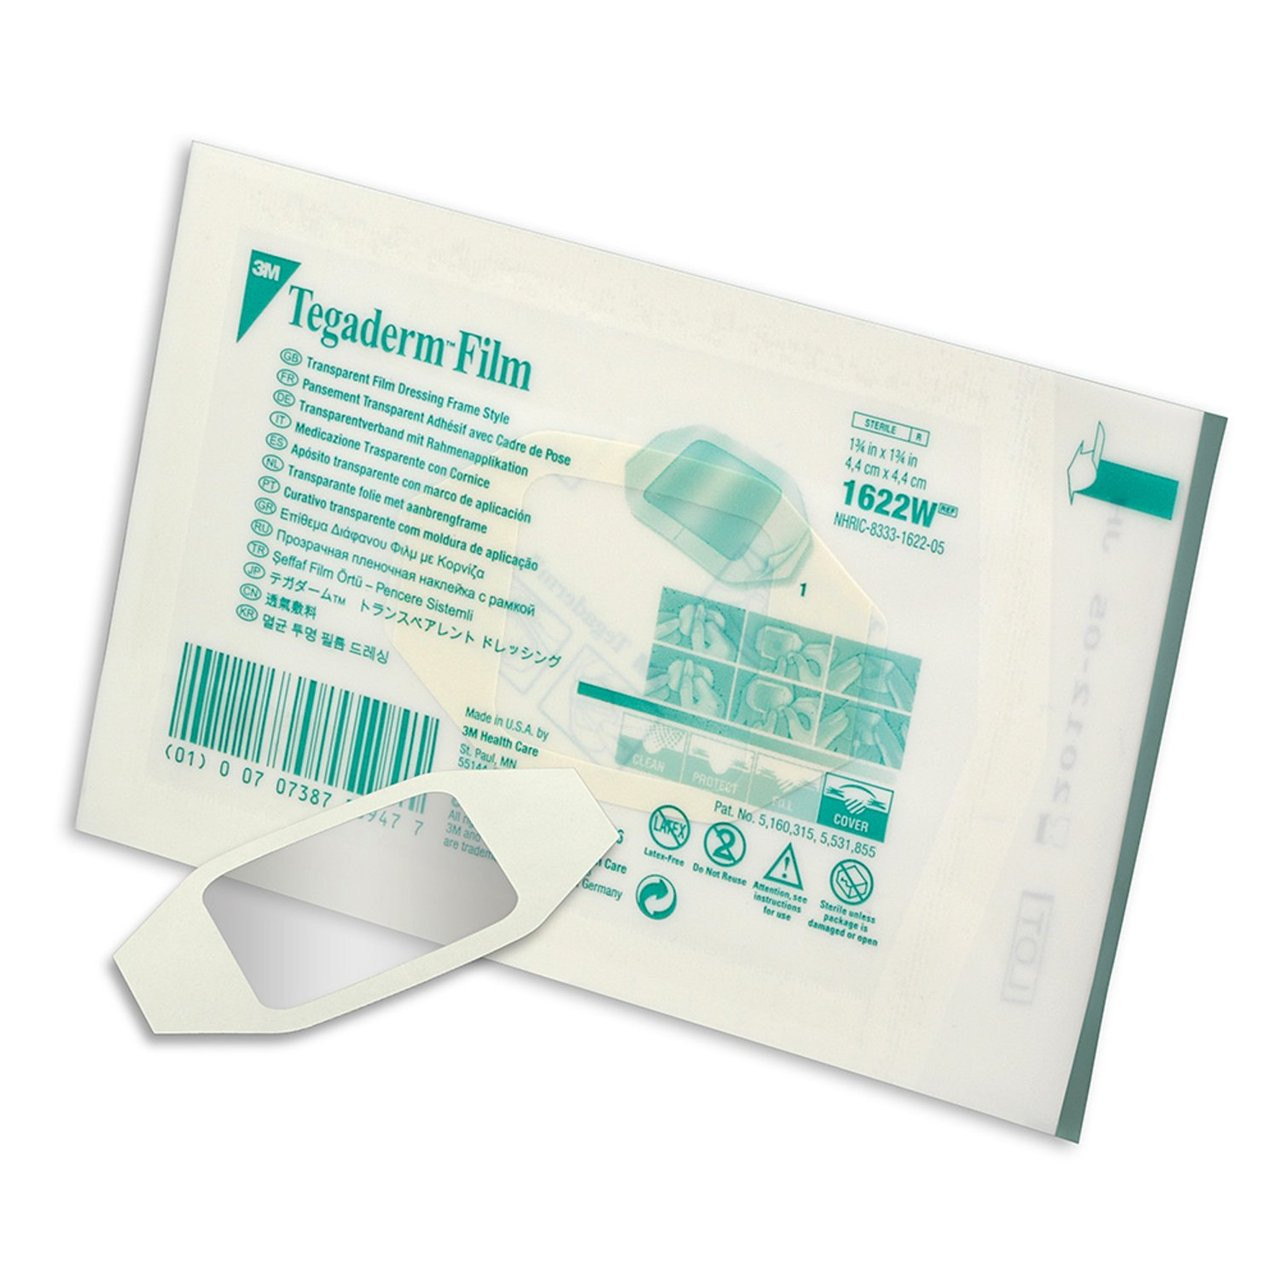 3M Tegaderm Transparent Film Dressing Picture Frame Style - USA Medical and  Surgical Supplies